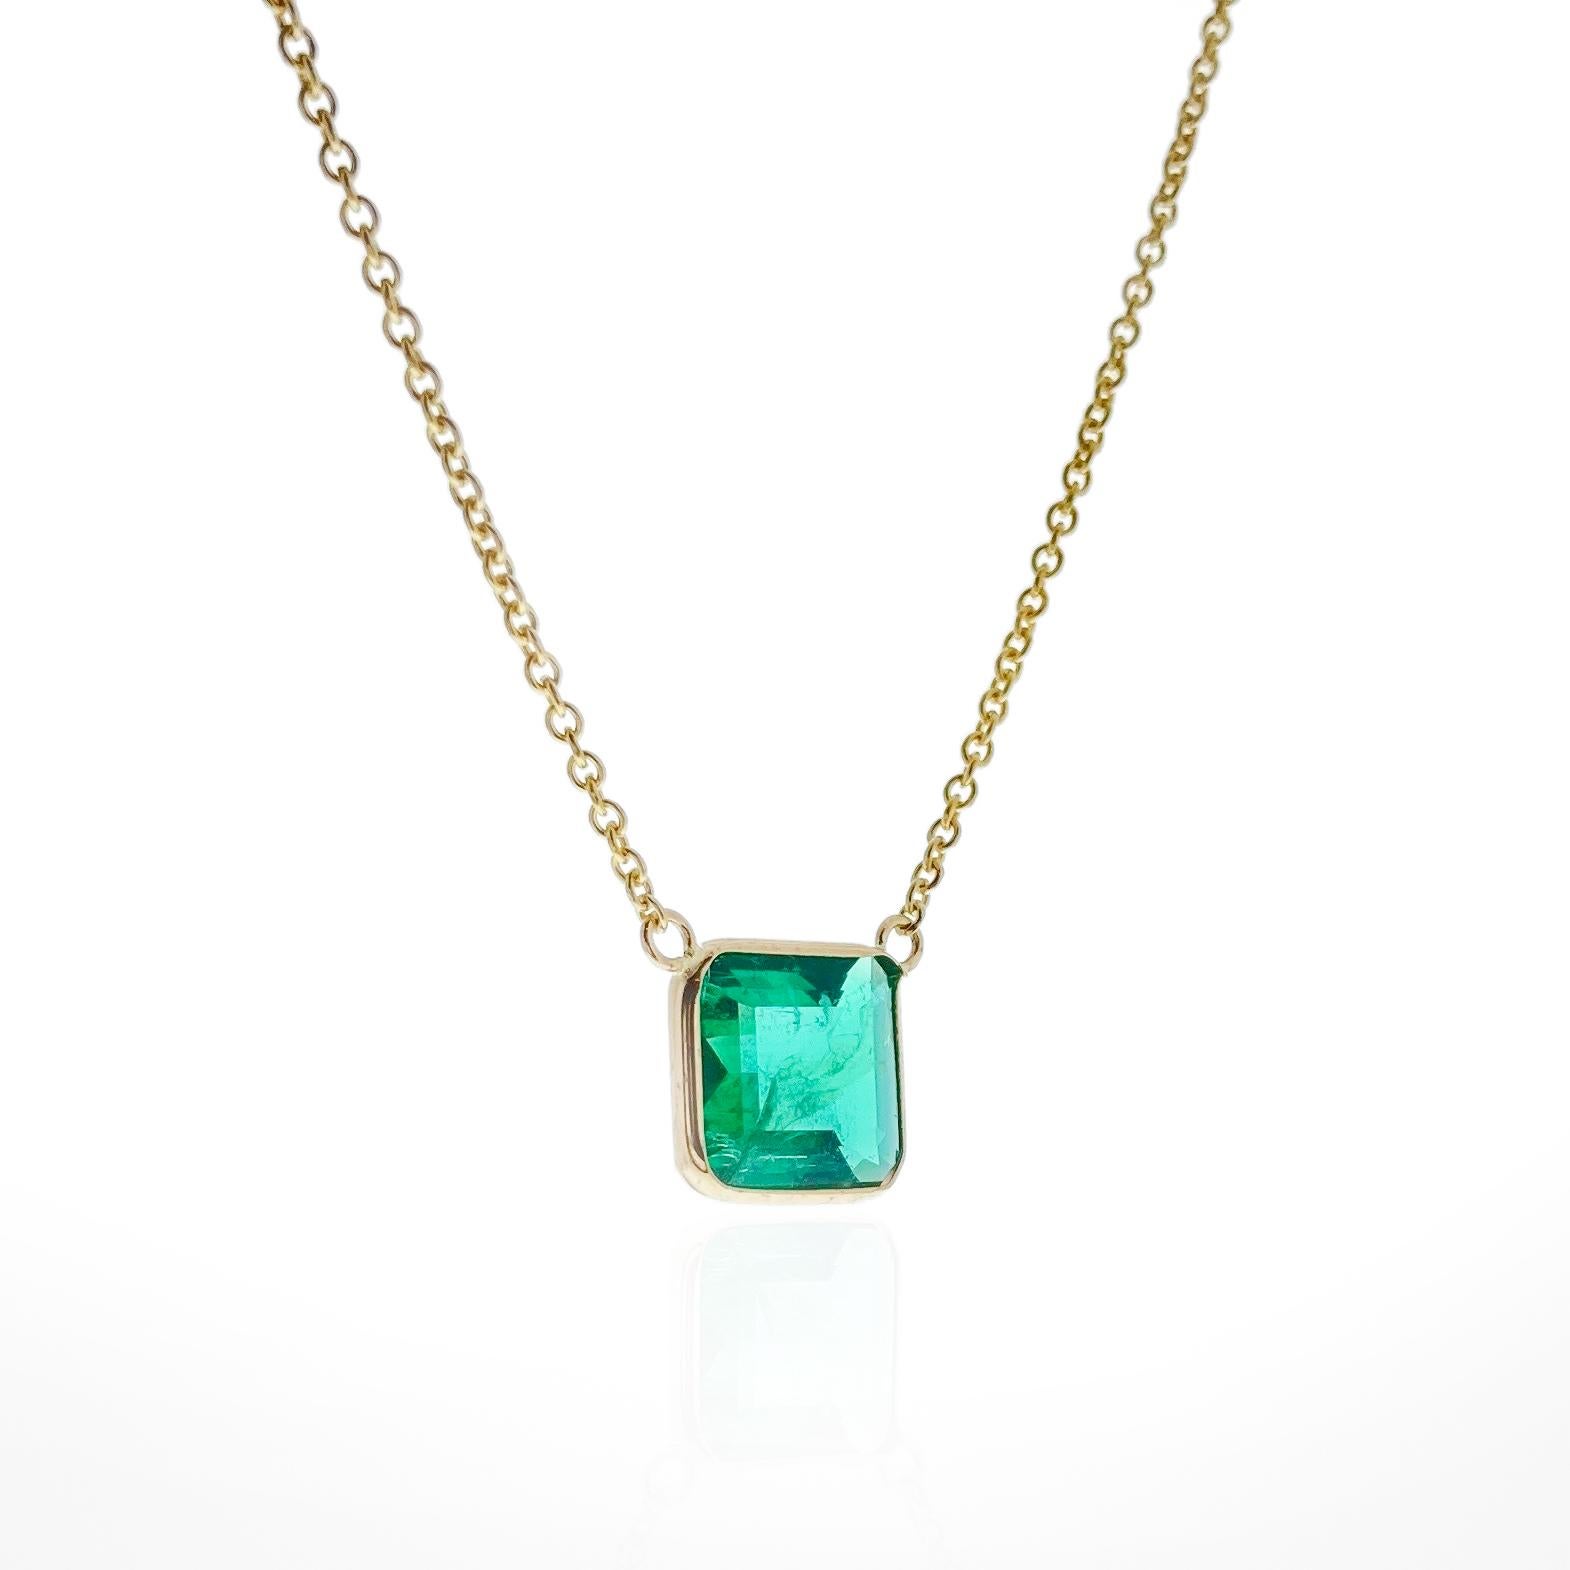 Contemporary 2.12 Carat Green Emerald Oct Cut Fashion Necklaces In 14K Yellow Gold For Sale